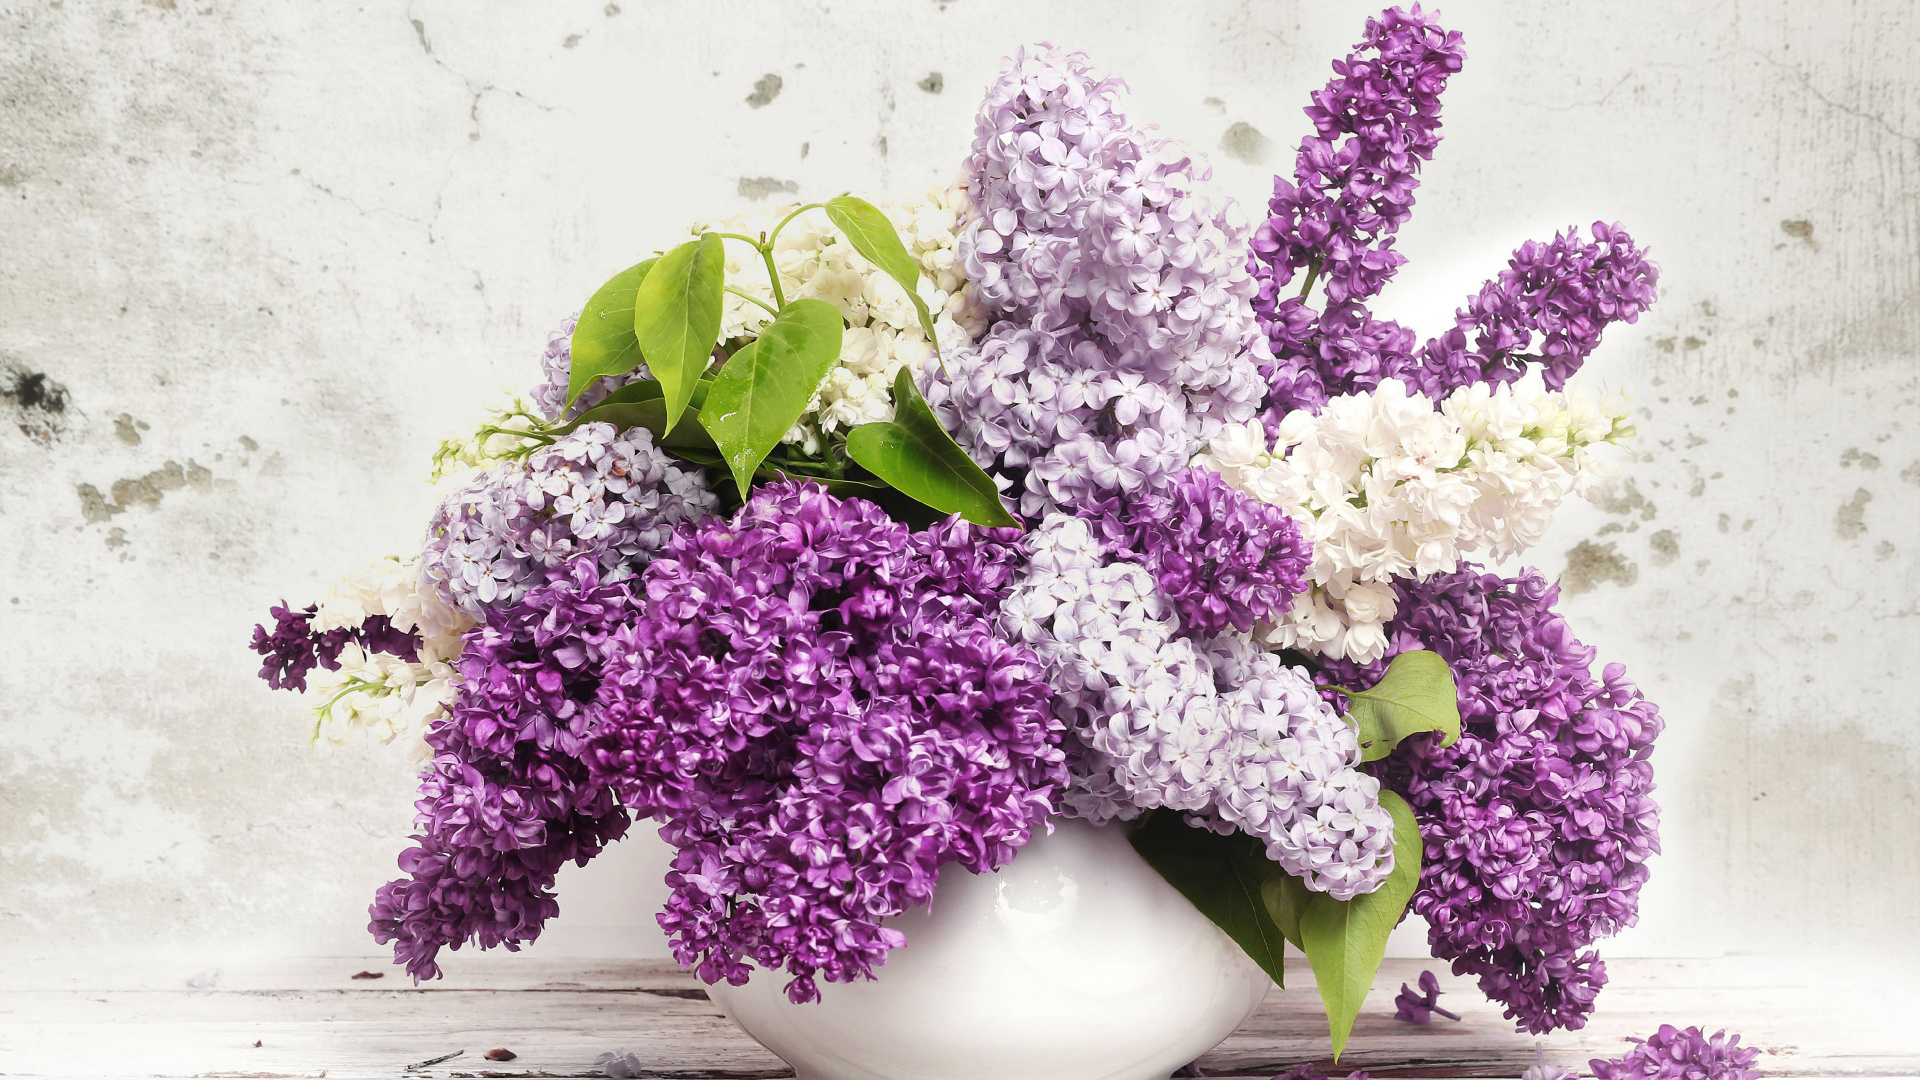 Purple and White Flowers in White Ceramic Vase. Wallpaper in 1920x1080 Resolution